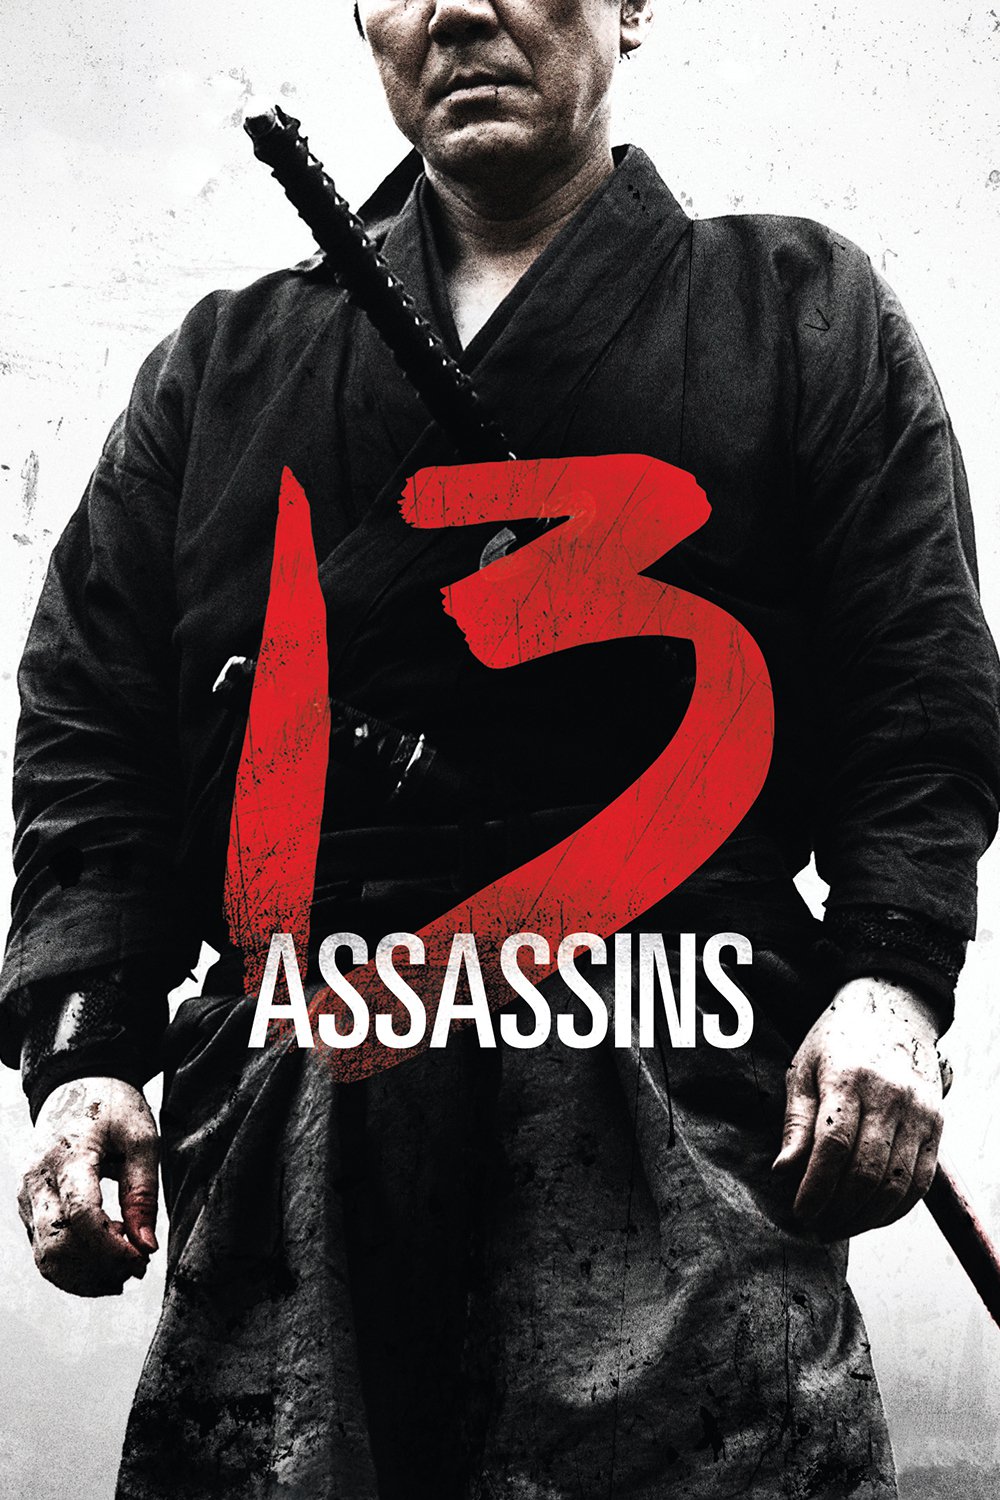 Poster for the movie "13 Assassins"